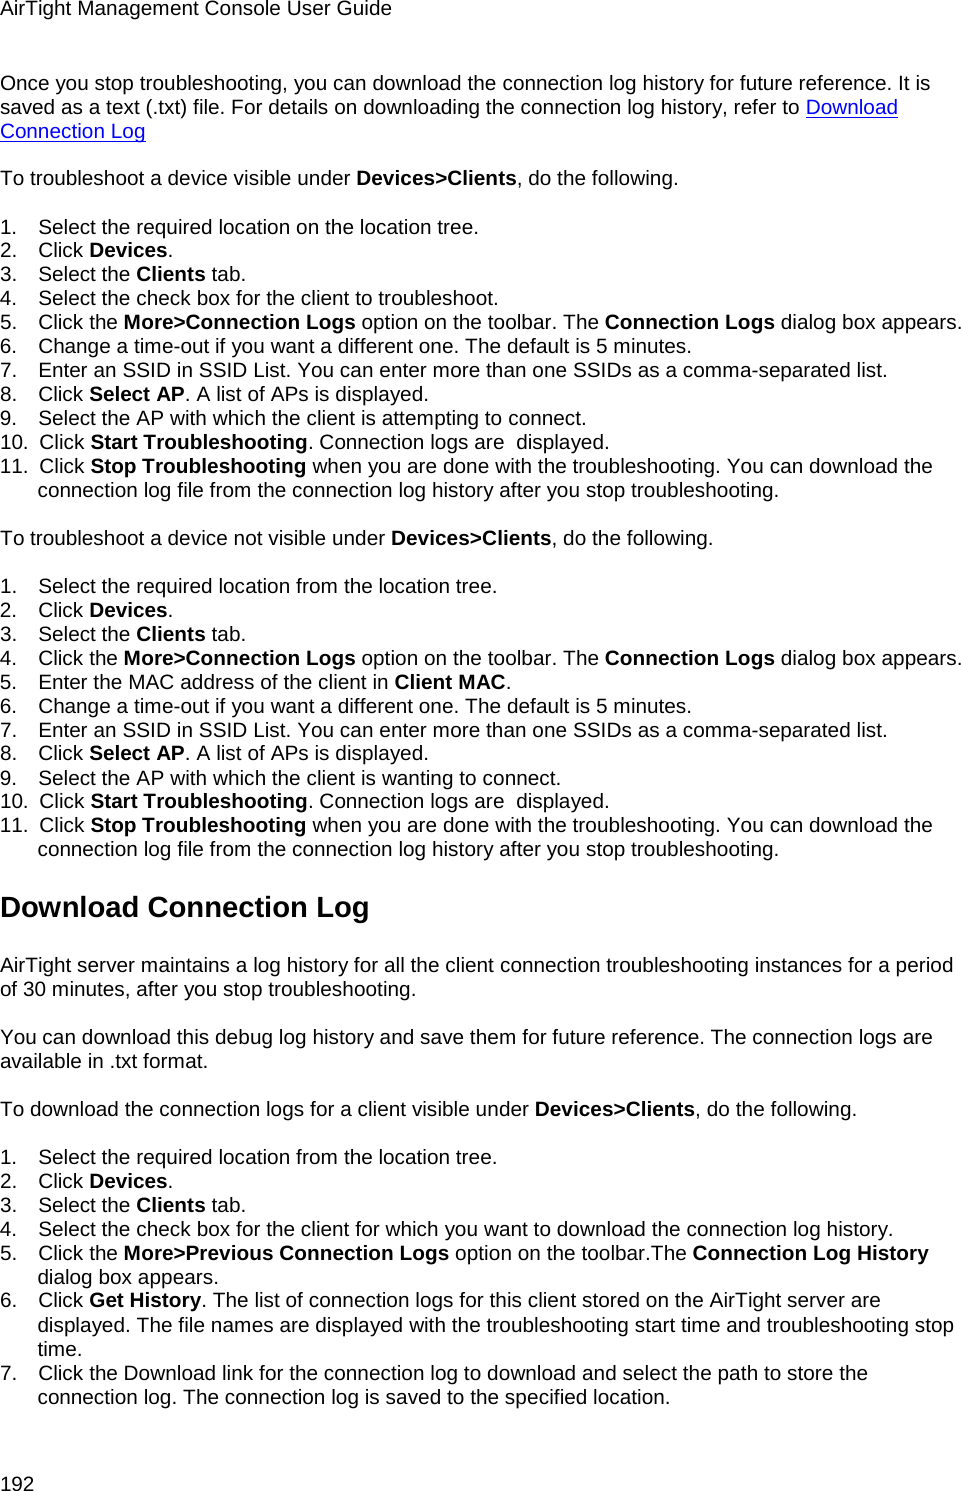 AirTight Management Console User Guide 192 Once you stop troubleshooting, you can download the connection log history for future reference. It is saved as a text (.txt) file. For details on downloading the connection log history, refer to Download Connection Log   To troubleshoot a device visible under Devices&gt;Clients, do the following.   1.      Select the required location on the location tree. 2.      Click Devices. 3.      Select the Clients tab. 4.      Select the check box for the client to troubleshoot. 5.      Click the More&gt;Connection Logs option on the toolbar. The Connection Logs dialog box appears. 6.      Change a time-out if you want a different one. The default is 5 minutes. 7.      Enter an SSID in SSID List. You can enter more than one SSIDs as a comma-separated list. 8.      Click Select AP. A list of APs is displayed. 9.      Select the AP with which the client is attempting to connect. 10.   Click Start Troubleshooting. Connection logs are  displayed. 11.   Click Stop Troubleshooting when you are done with the troubleshooting. You can download the connection log file from the connection log history after you stop troubleshooting.   To troubleshoot a device not visible under Devices&gt;Clients, do the following.   1.      Select the required location from the location tree. 2.      Click Devices. 3.      Select the Clients tab. 4.      Click the More&gt;Connection Logs option on the toolbar. The Connection Logs dialog box appears. 5.      Enter the MAC address of the client in Client MAC. 6.      Change a time-out if you want a different one. The default is 5 minutes. 7.      Enter an SSID in SSID List. You can enter more than one SSIDs as a comma-separated list. 8.      Click Select AP. A list of APs is displayed. 9.      Select the AP with which the client is wanting to connect. 10.   Click Start Troubleshooting. Connection logs are  displayed. 11.   Click Stop Troubleshooting when you are done with the troubleshooting. You can download the connection log file from the connection log history after you stop troubleshooting. Download Connection Log  AirTight server maintains a log history for all the client connection troubleshooting instances for a period of 30 minutes, after you stop troubleshooting.   You can download this debug log history and save them for future reference. The connection logs are available in .txt format.   To download the connection logs for a client visible under Devices&gt;Clients, do the following.   1.      Select the required location from the location tree. 2.      Click Devices. 3.      Select the Clients tab. 4.      Select the check box for the client for which you want to download the connection log history. 5.      Click the More&gt;Previous Connection Logs option on the toolbar.The Connection Log History dialog box appears. 6.      Click Get History. The list of connection logs for this client stored on the AirTight server are displayed. The file names are displayed with the troubleshooting start time and troubleshooting stop time. 7.      Click the Download link for the connection log to download and select the path to store the connection log. The connection log is saved to the specified location. 